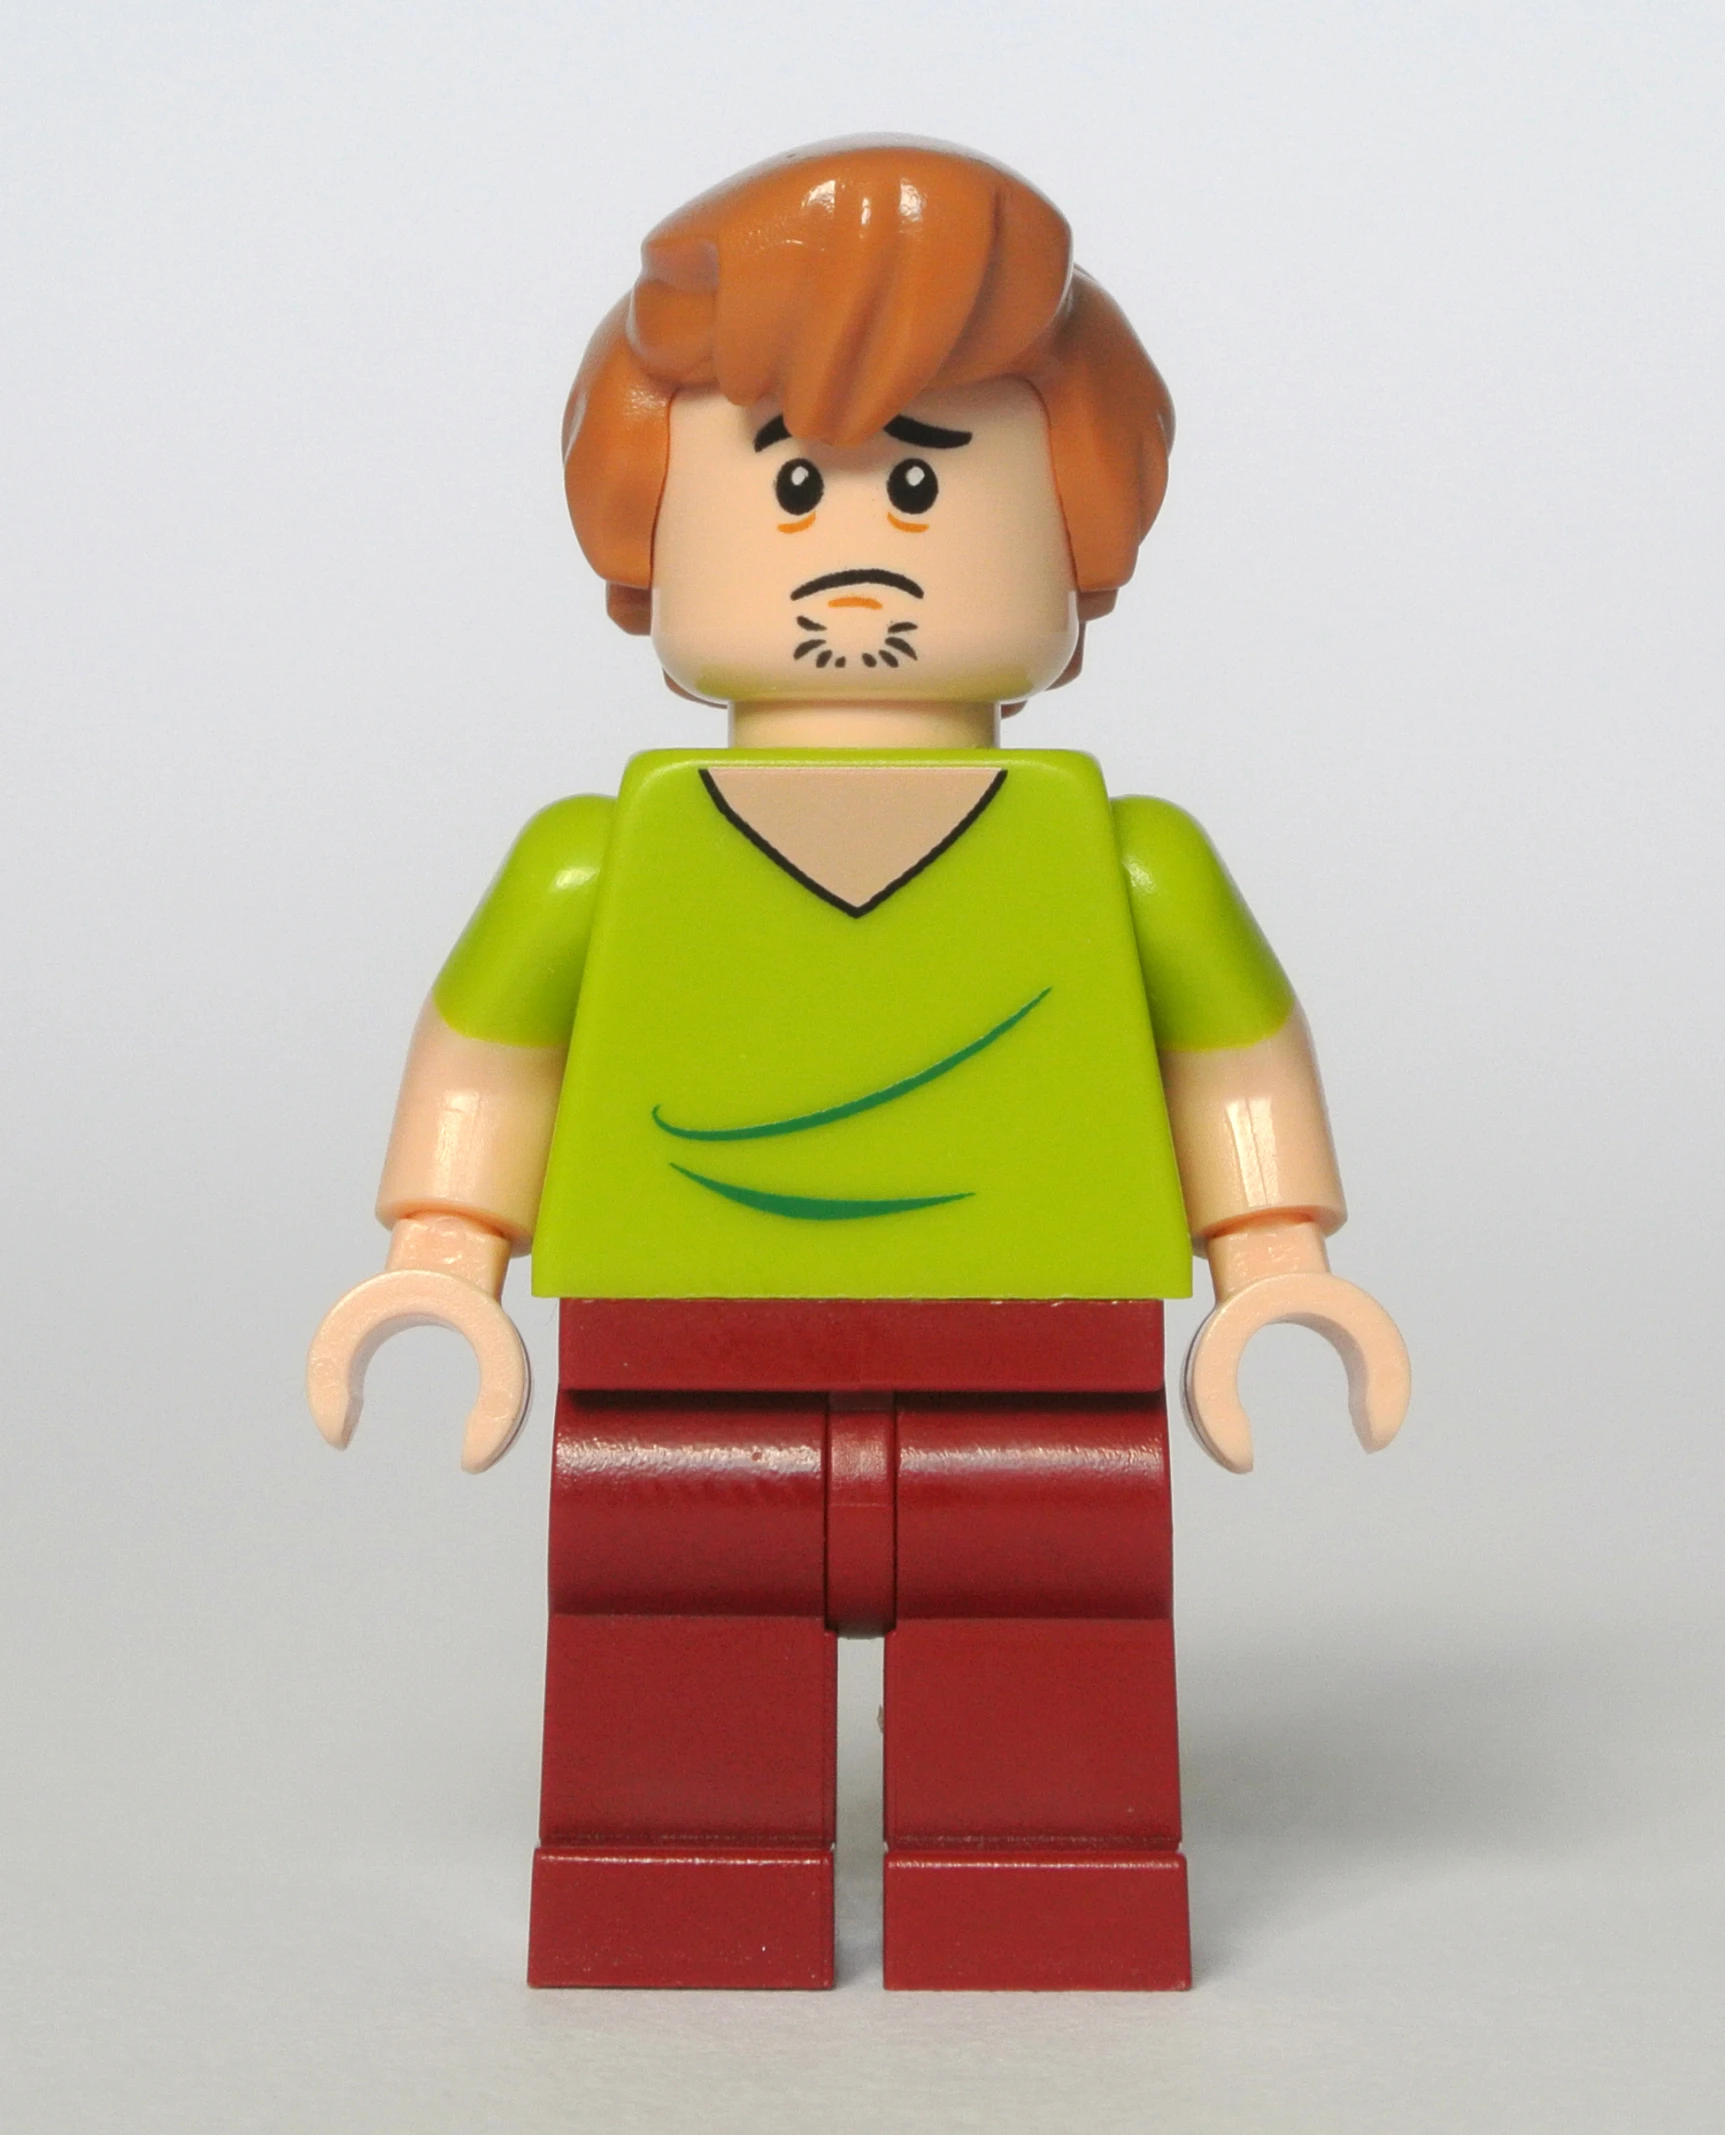 the small lego person has red hair and green shirt